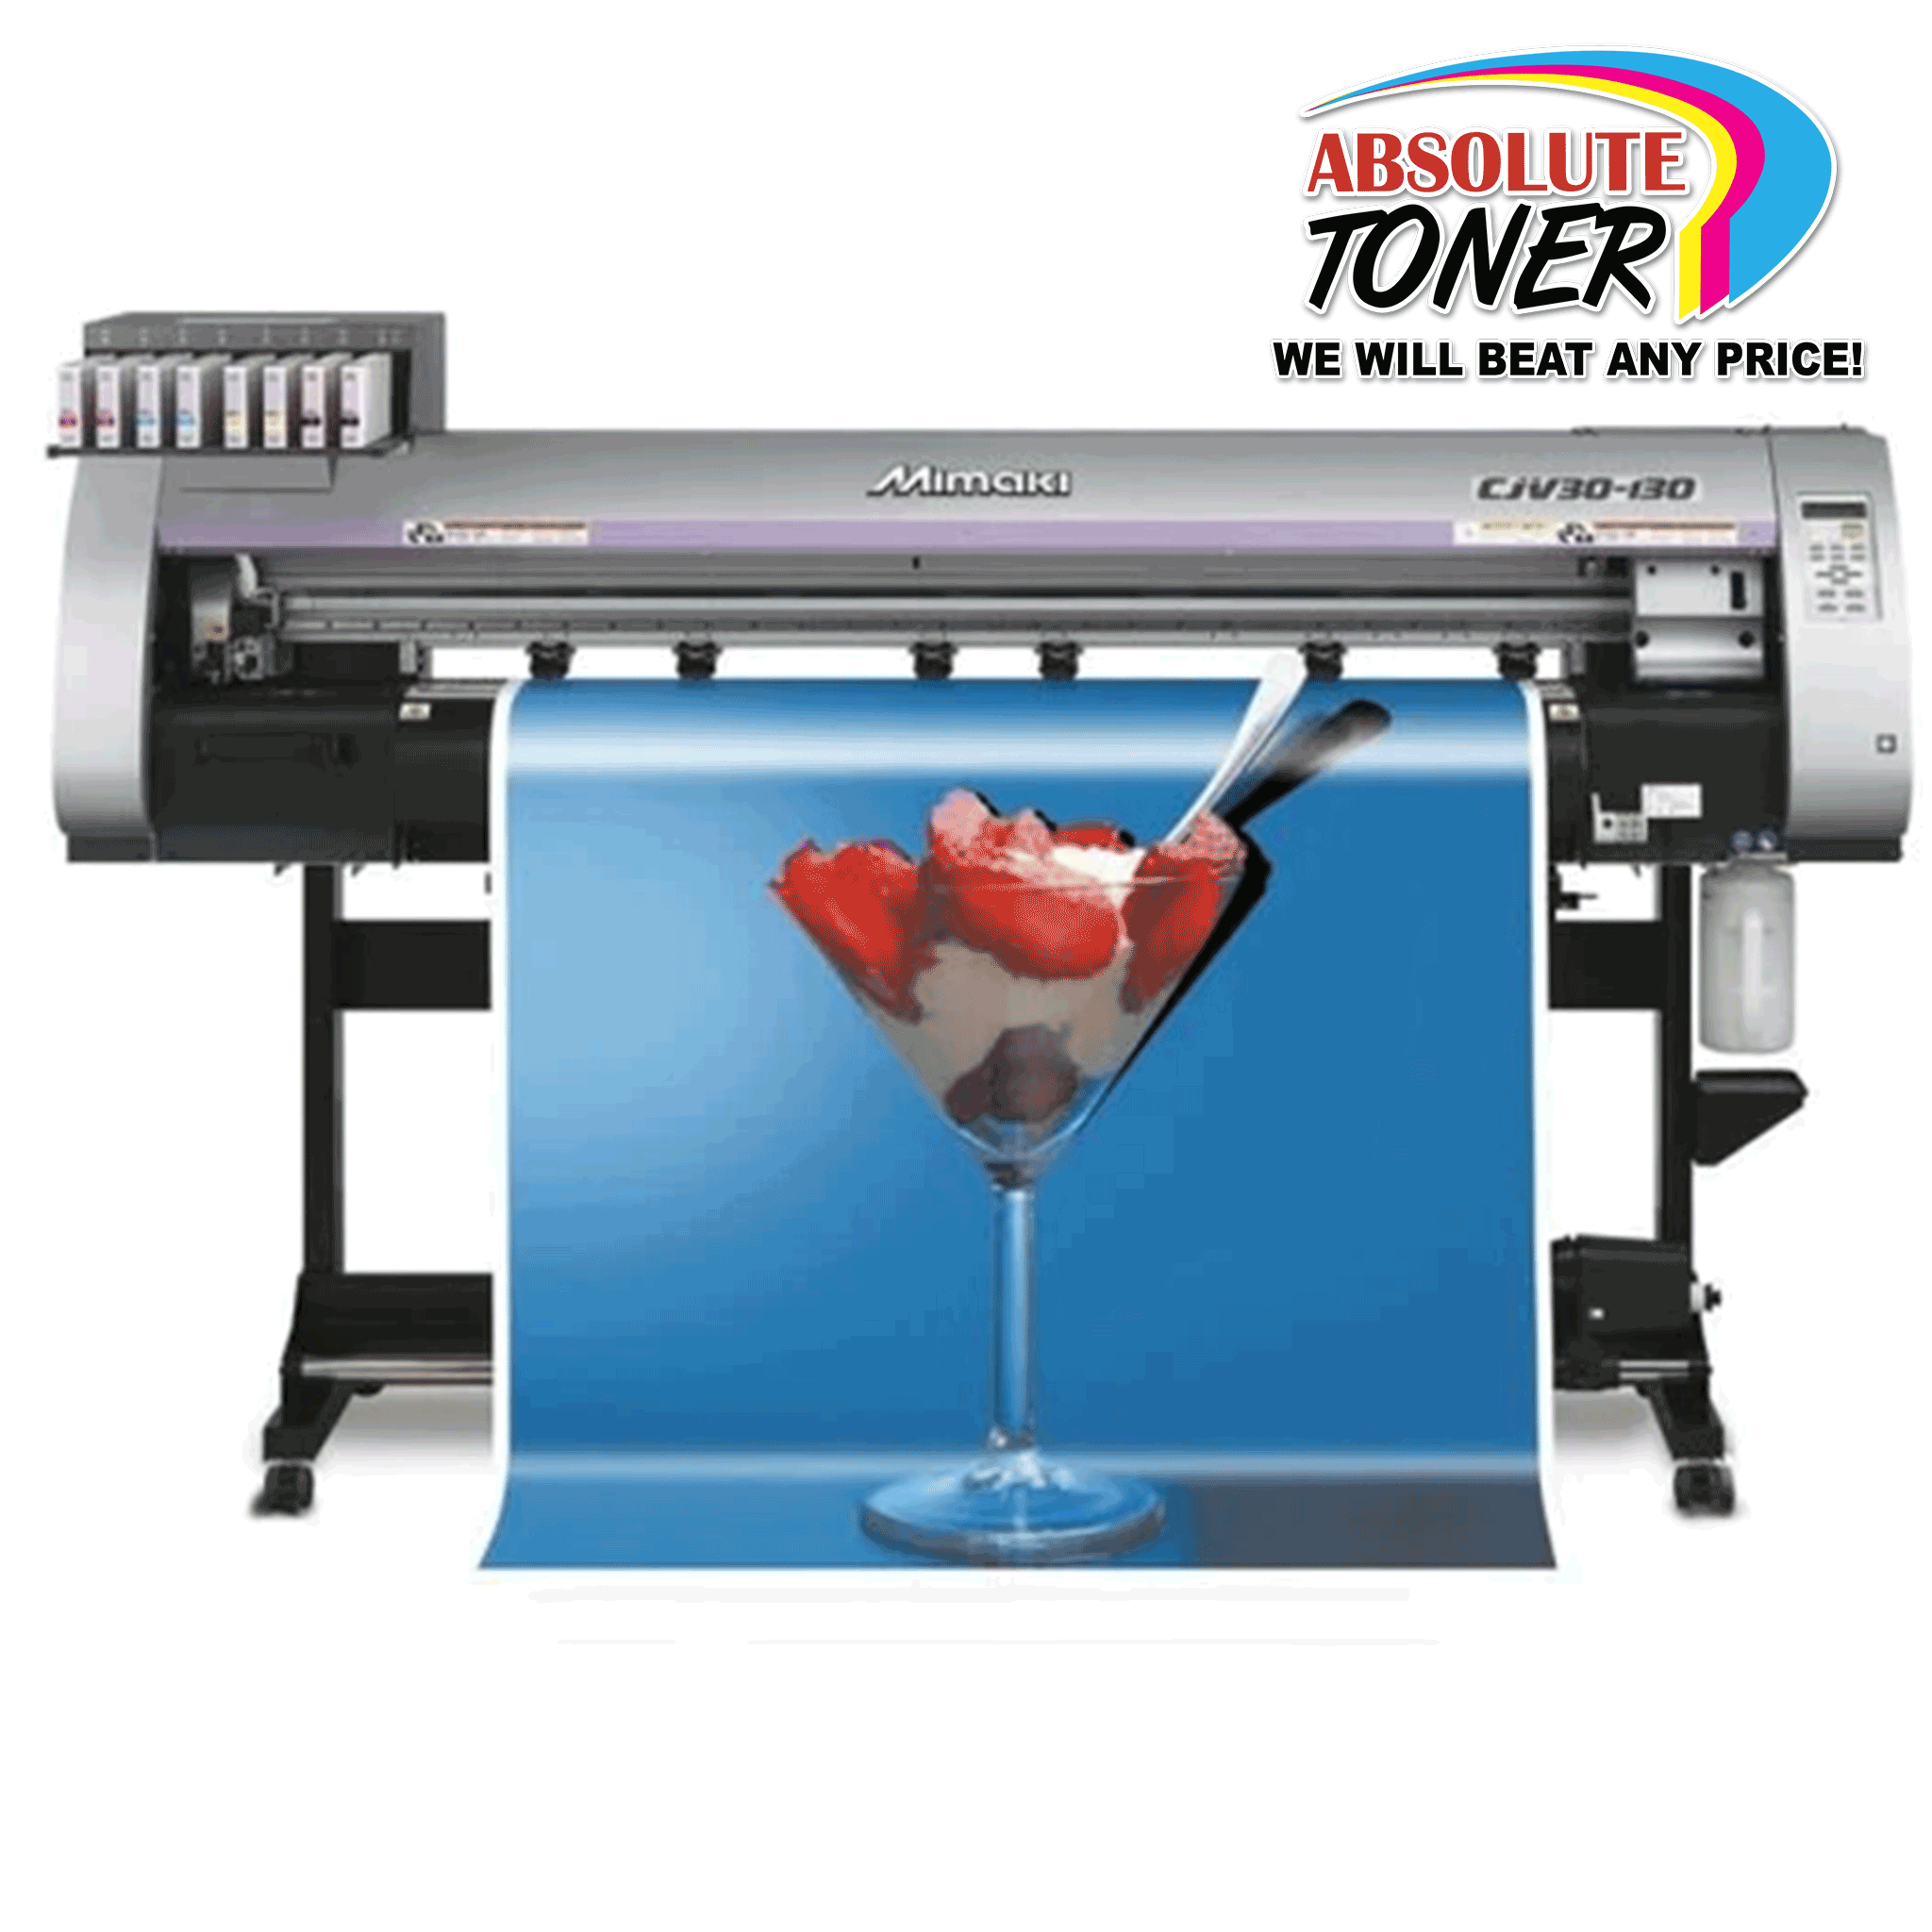 Absolute Toner $149/Month MIMAKI CJV30-130 (54-Inch) Printer/Cutter With BRAND-NEW Original MIMAKI HEAD & CUP Large Format Printers